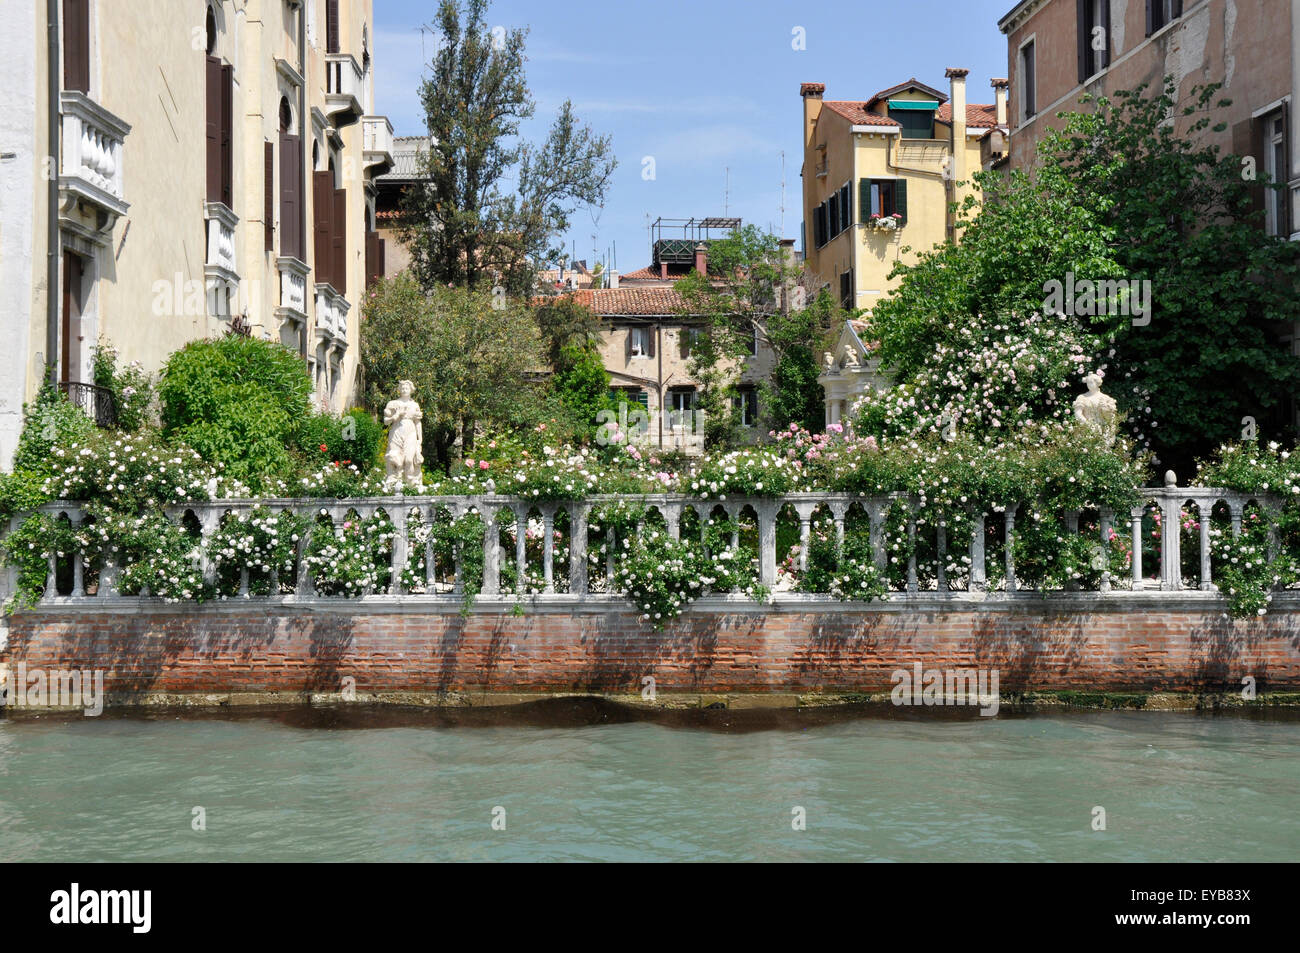 Italy - Venice - unexpected on Canale Grande - secluded sunlit rose garden - classical statues - ornate stone parapet - colour Stock Photo